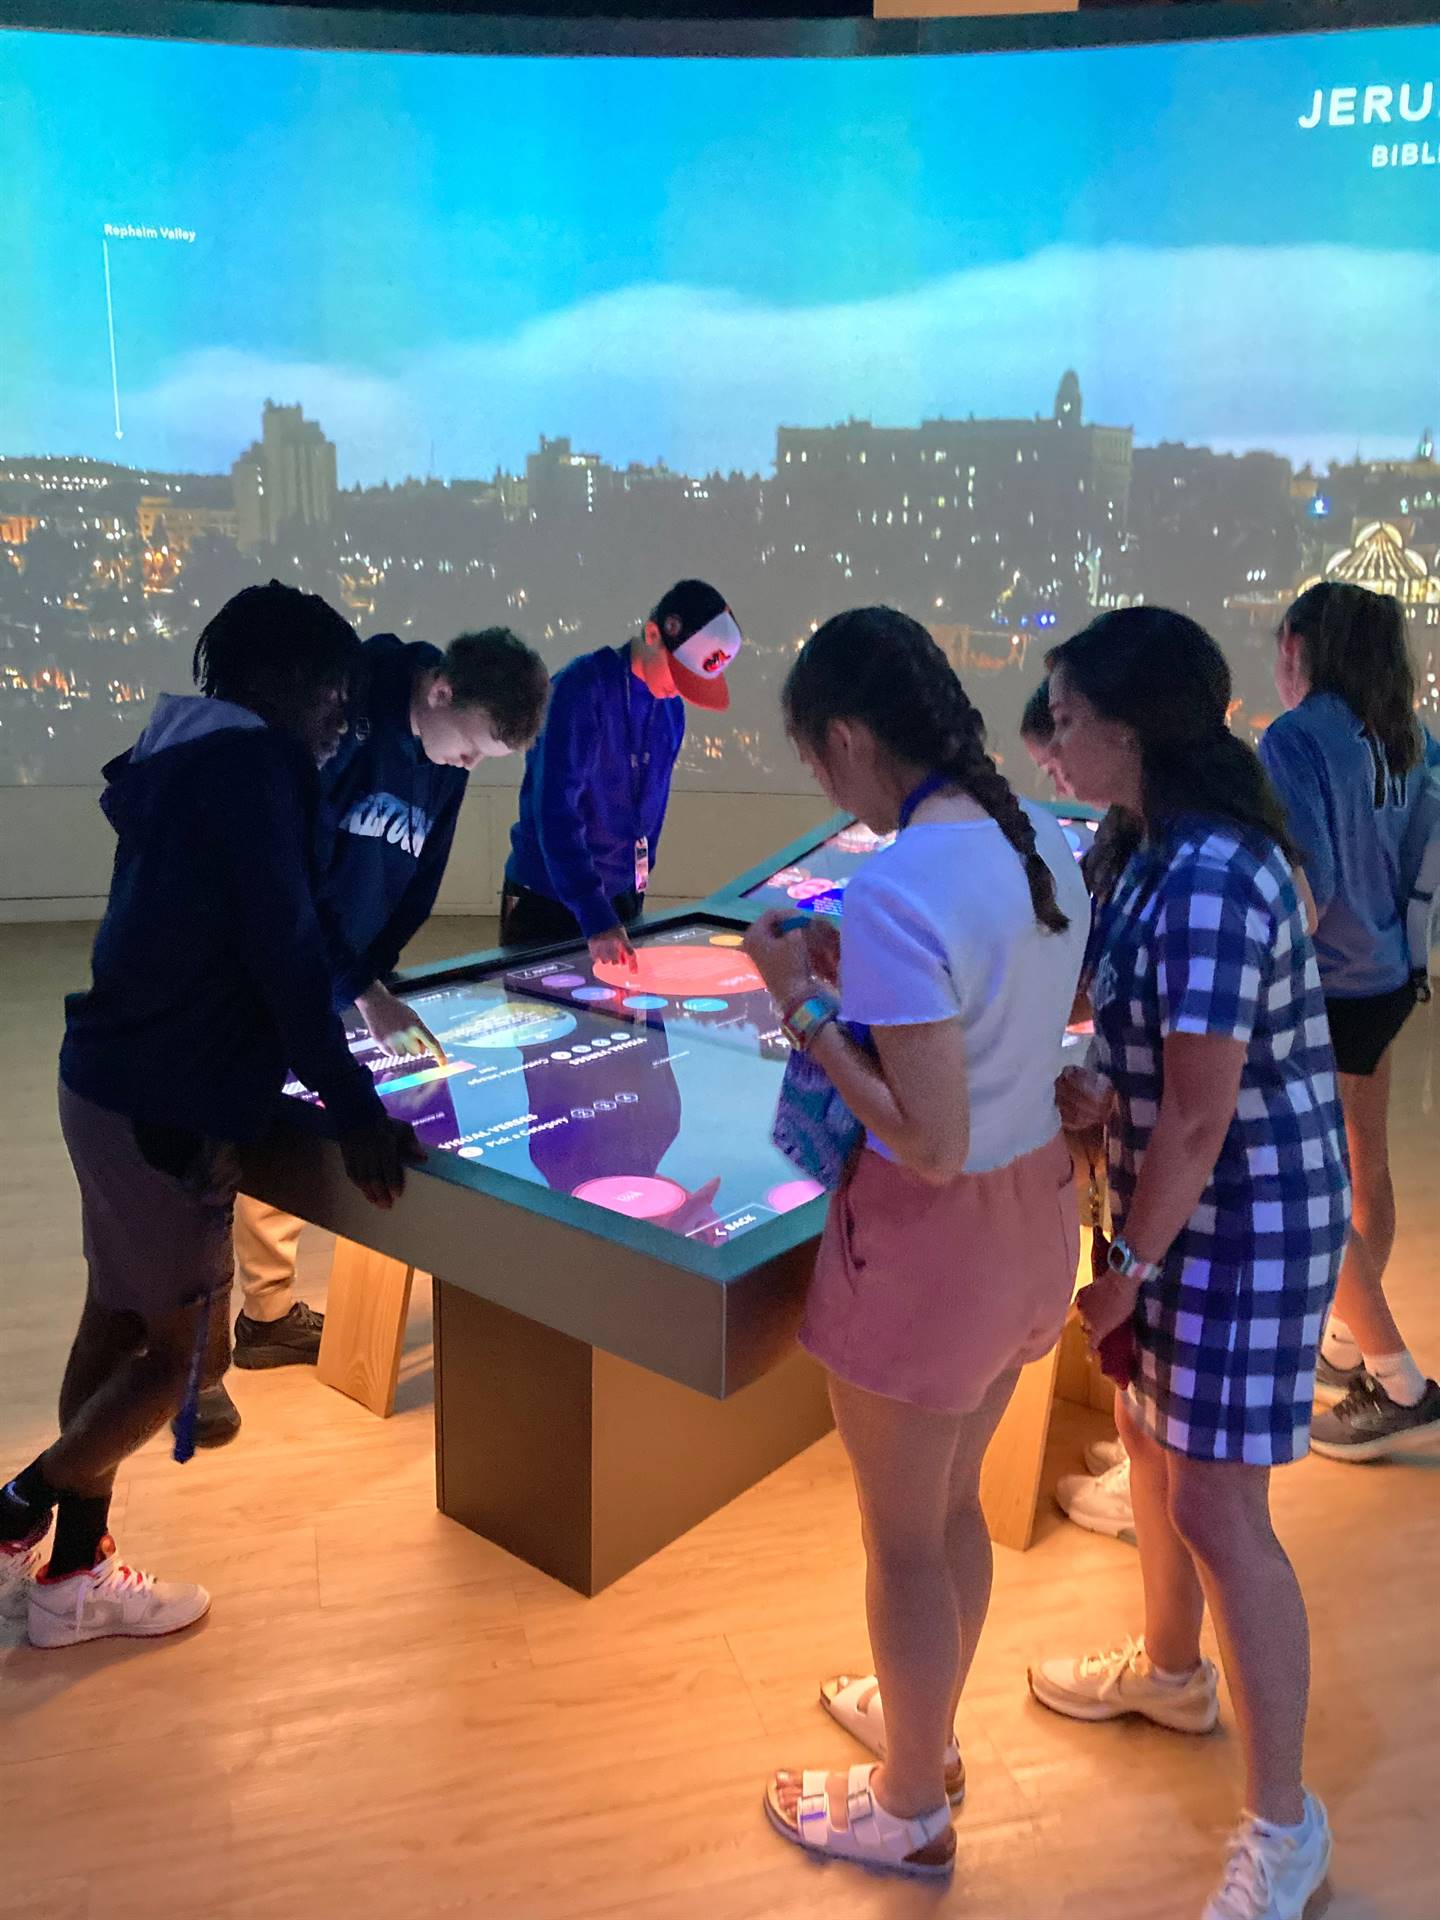 Students using an interactive display at Museum of the Bible